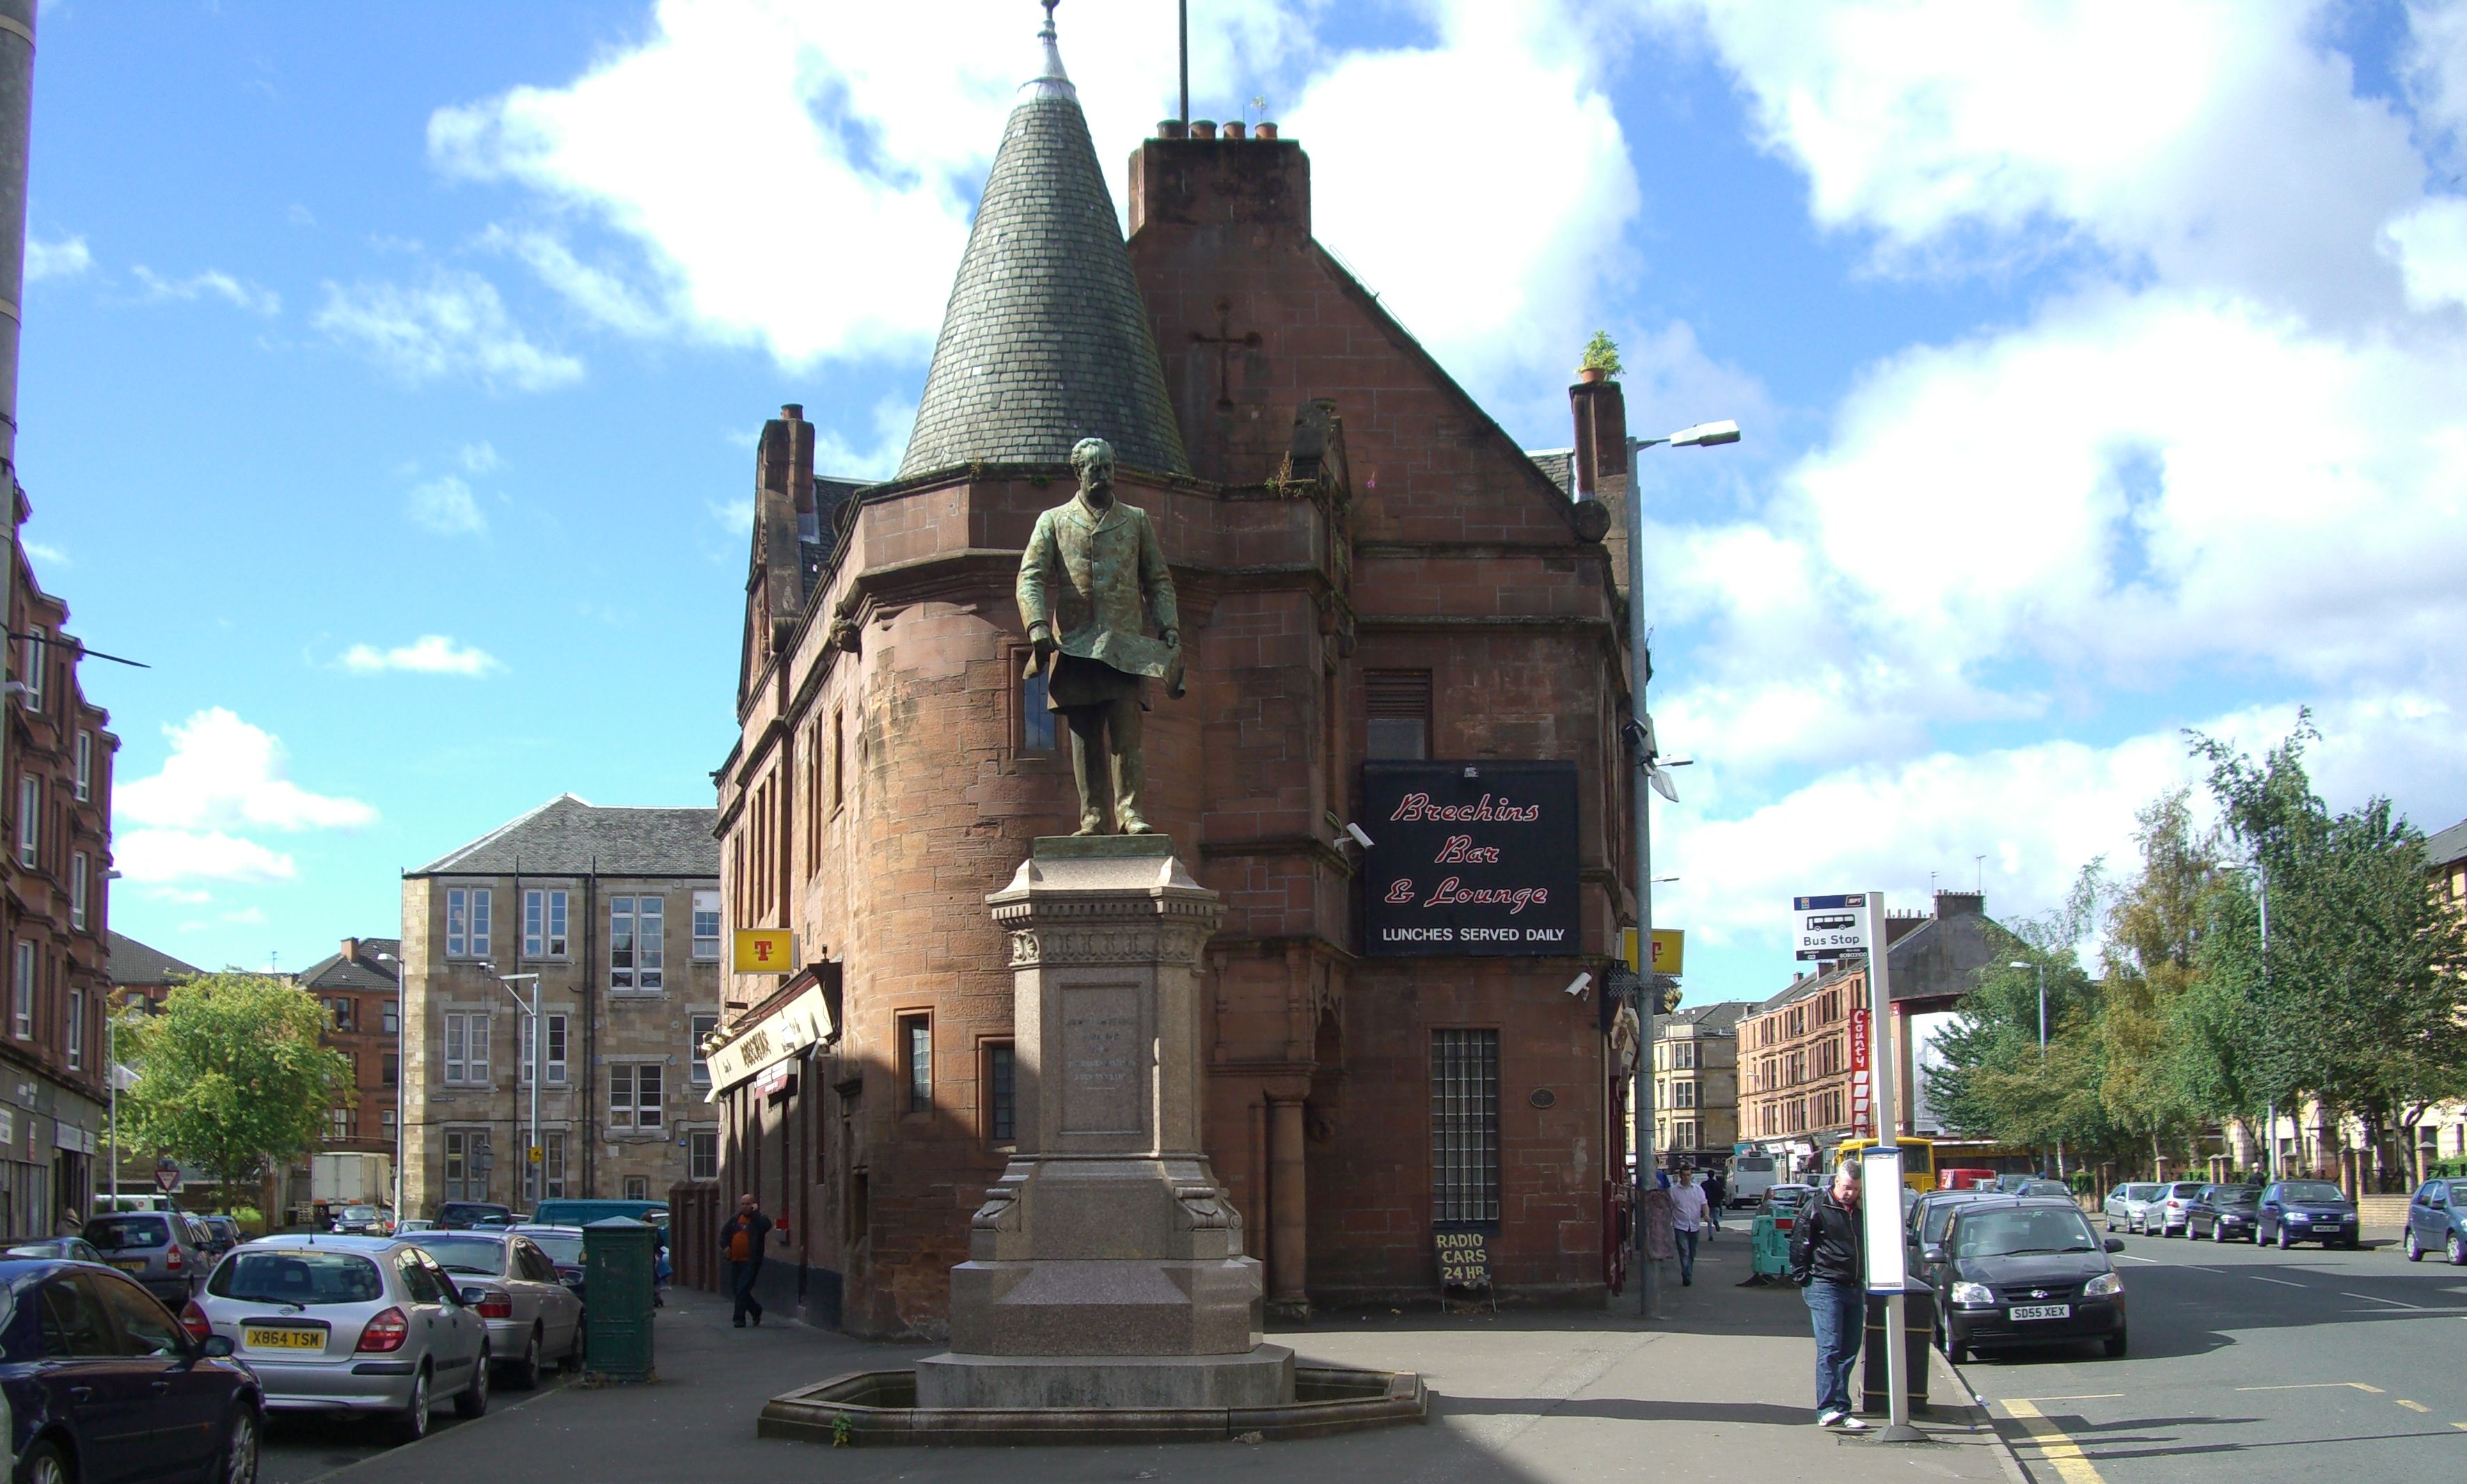 Sir William Pearce statue in front of the Pearce Institute Building in Govan